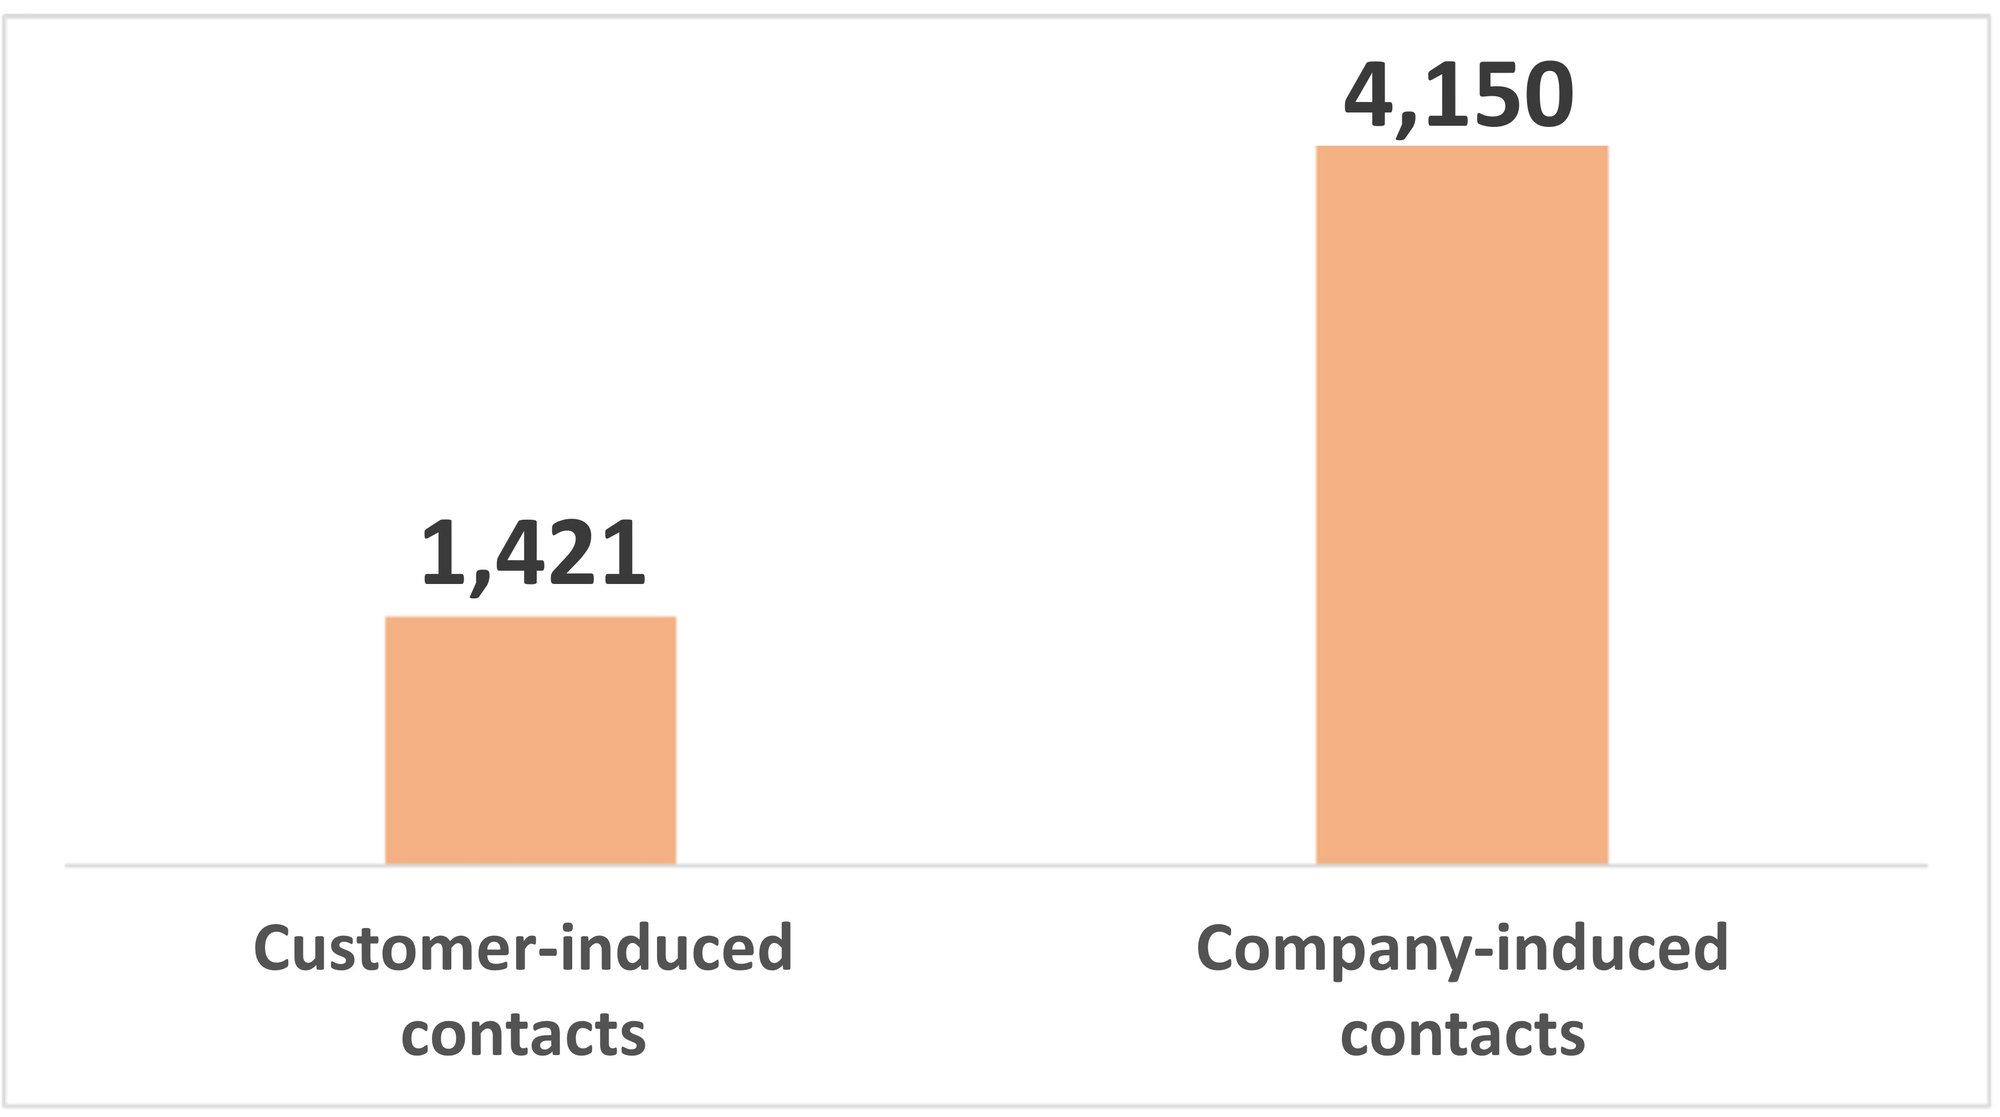 The chart shows a comparison of customer-induced contacts (1,421) and company-induced contacts (4,150)